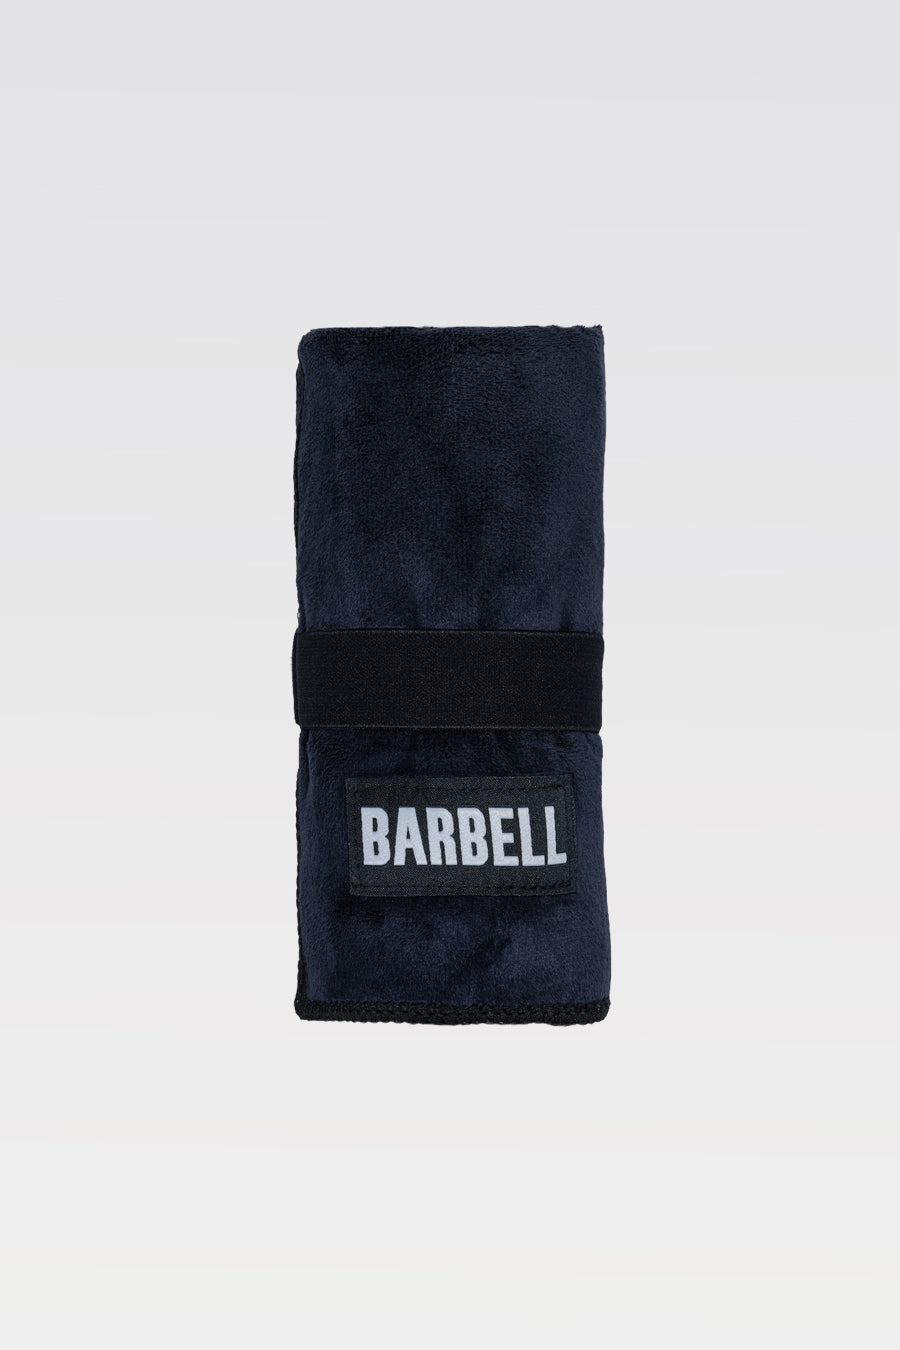 Running Bare Activewear Accessory & Workout Towel